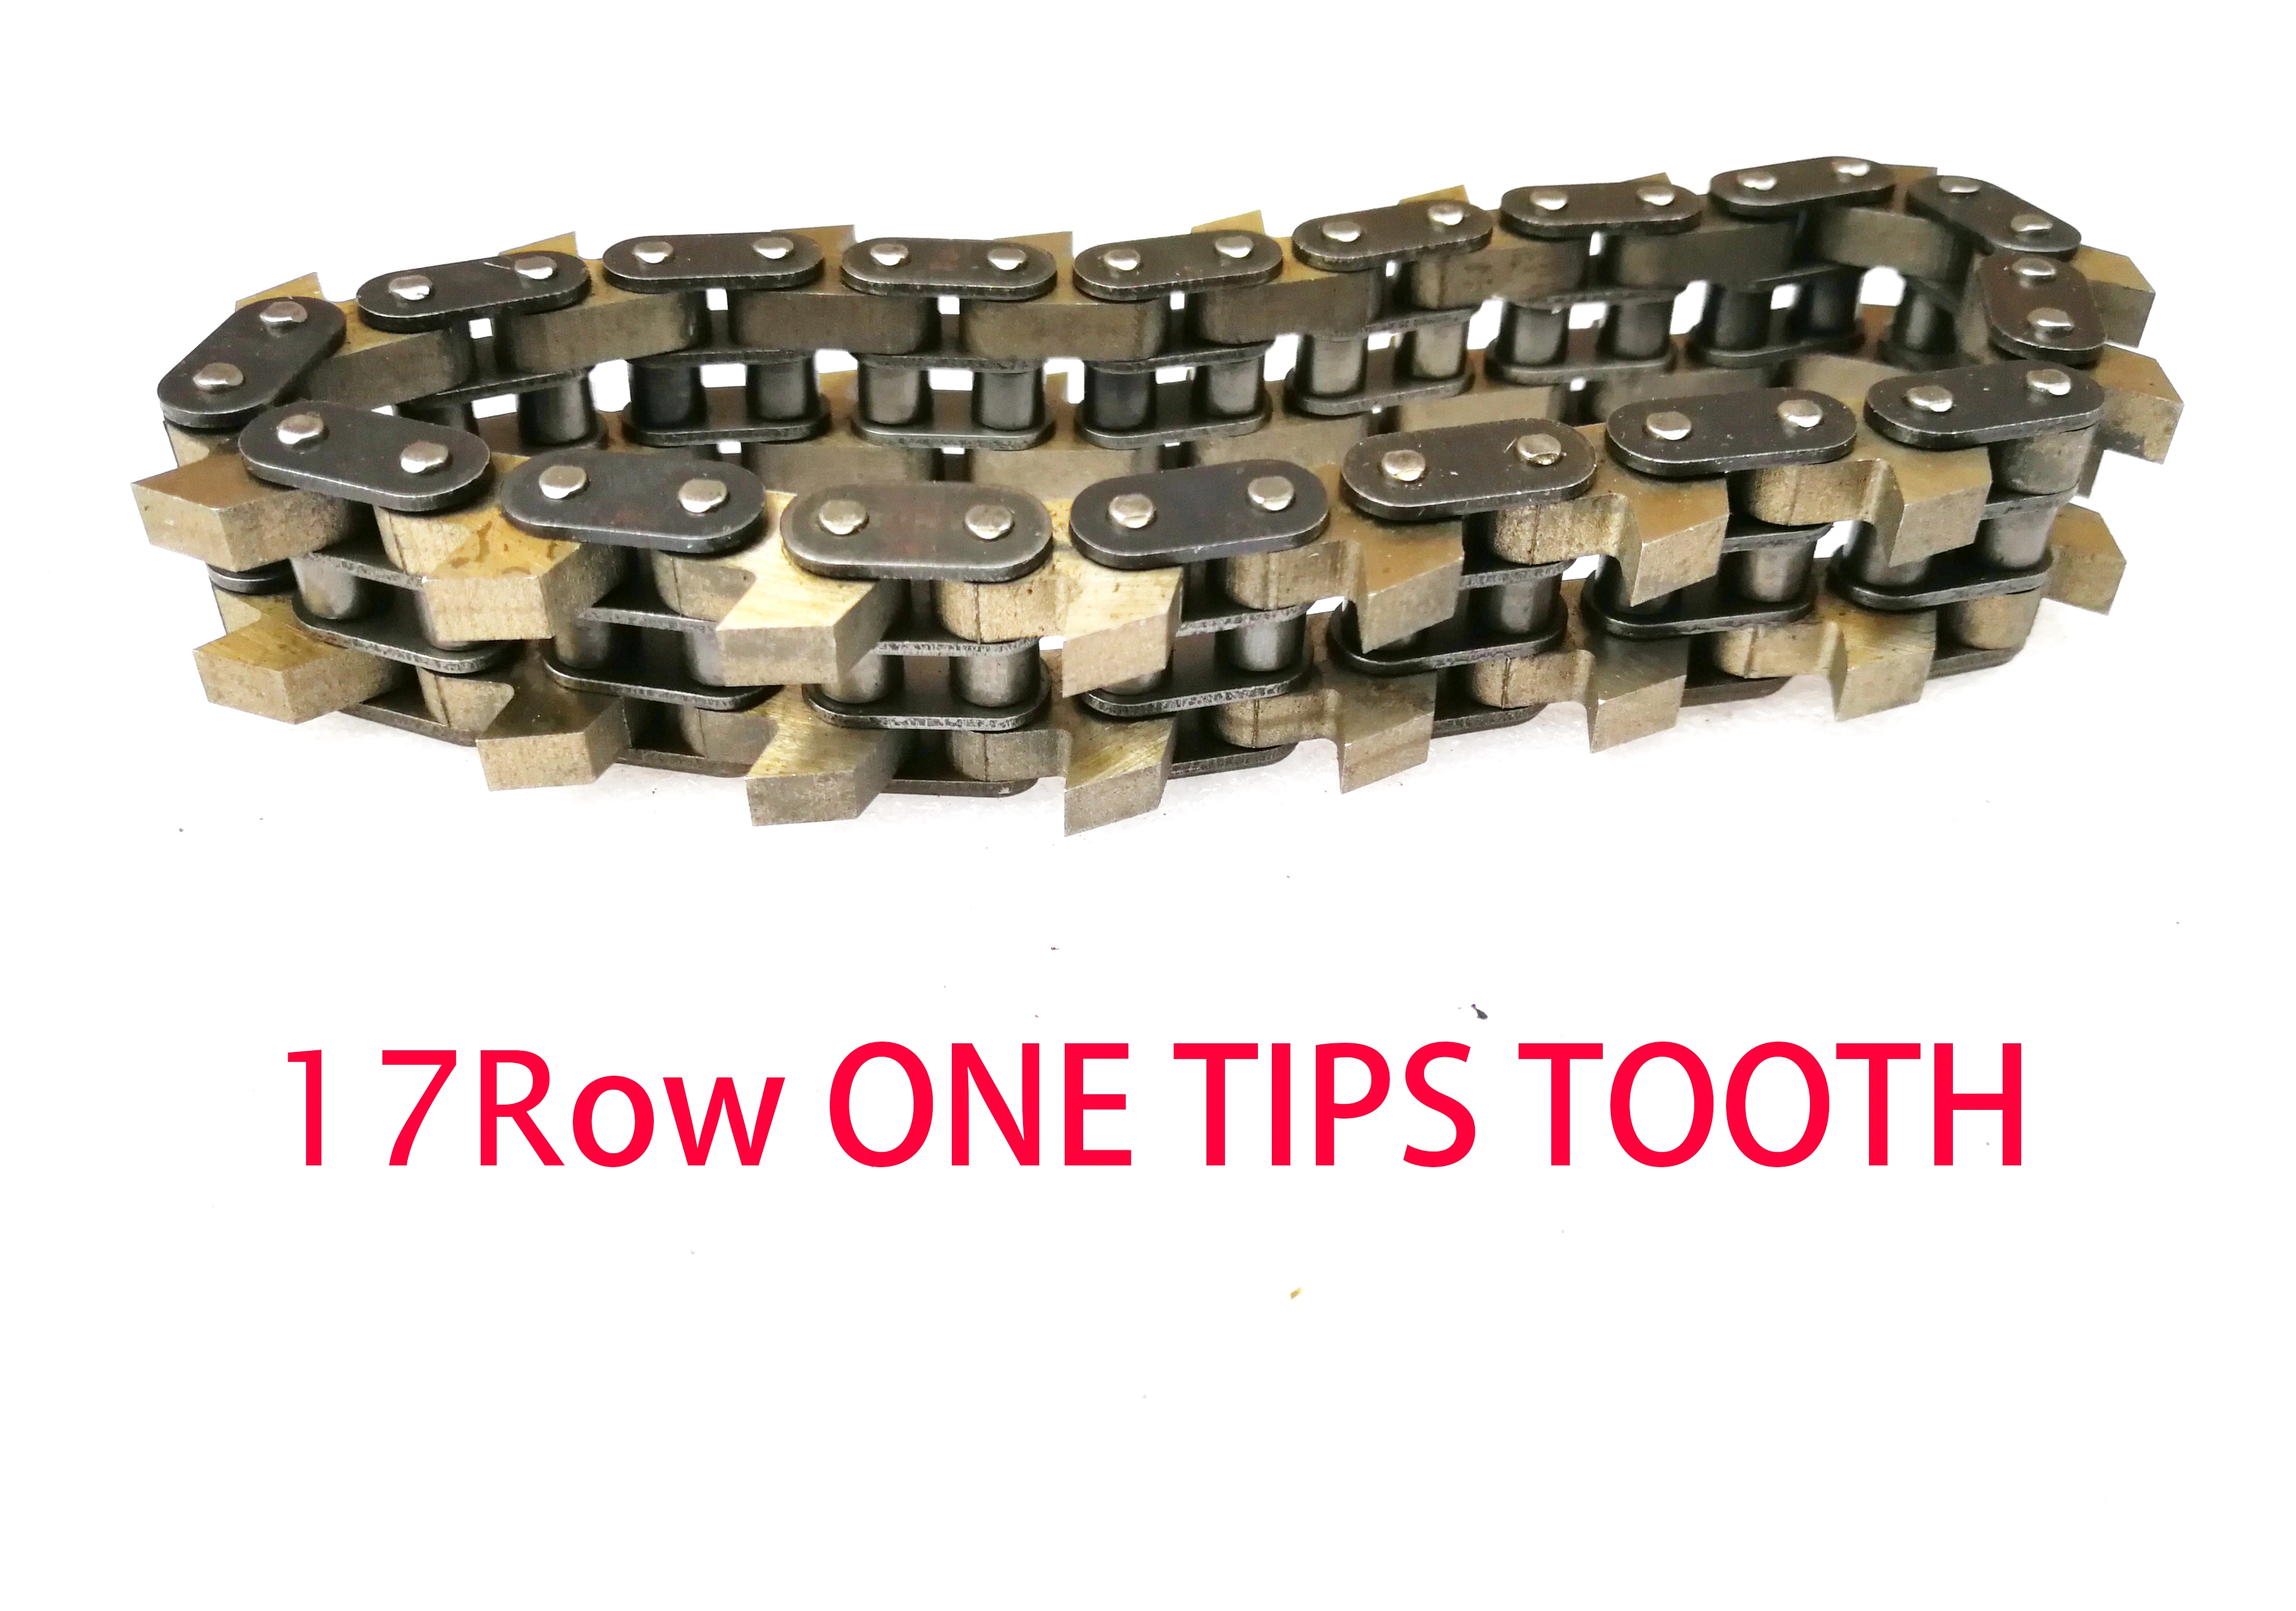 17 Row  One Tip Middle Tooth Cutter Saw Chain For Pneumatic Waste Stripper Carton Paper Stripping Machine Detachable Hinge Joint enlarge